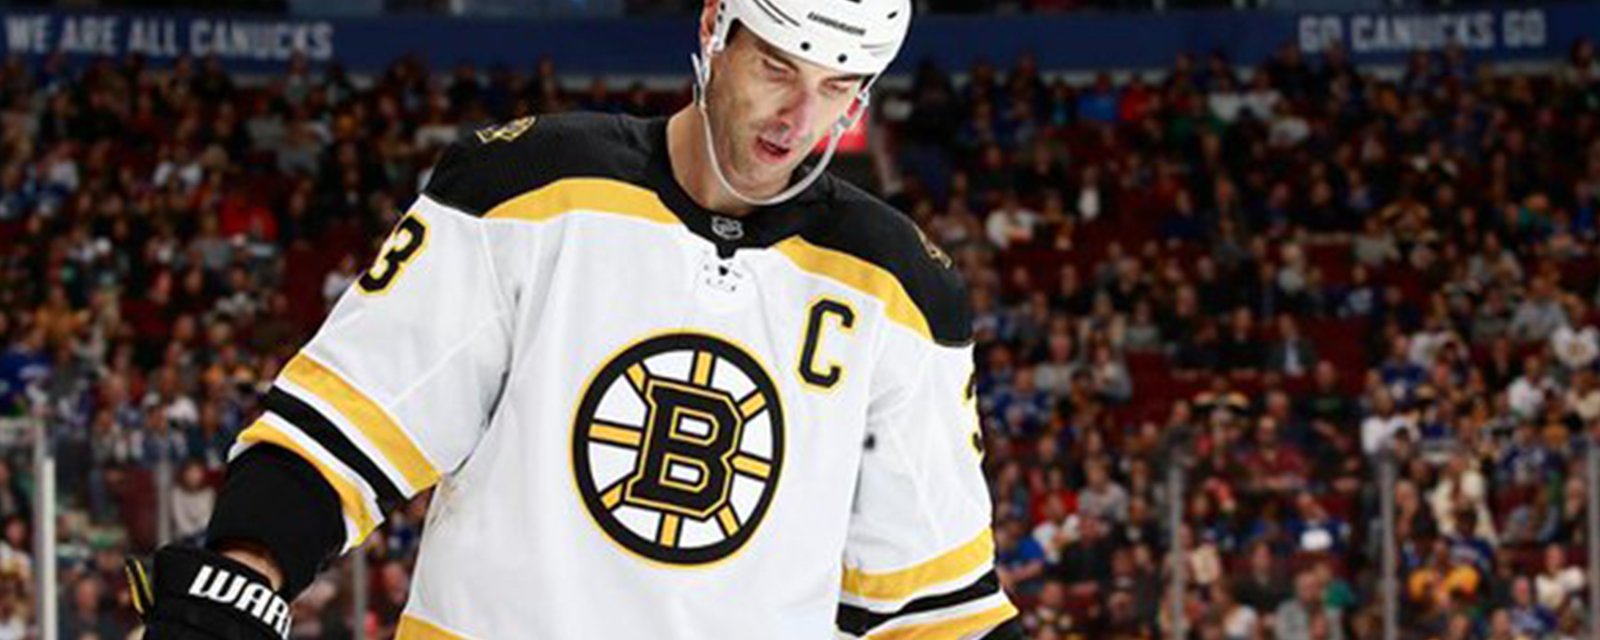 Report: The worst is confirmed for Bruins captain Chara